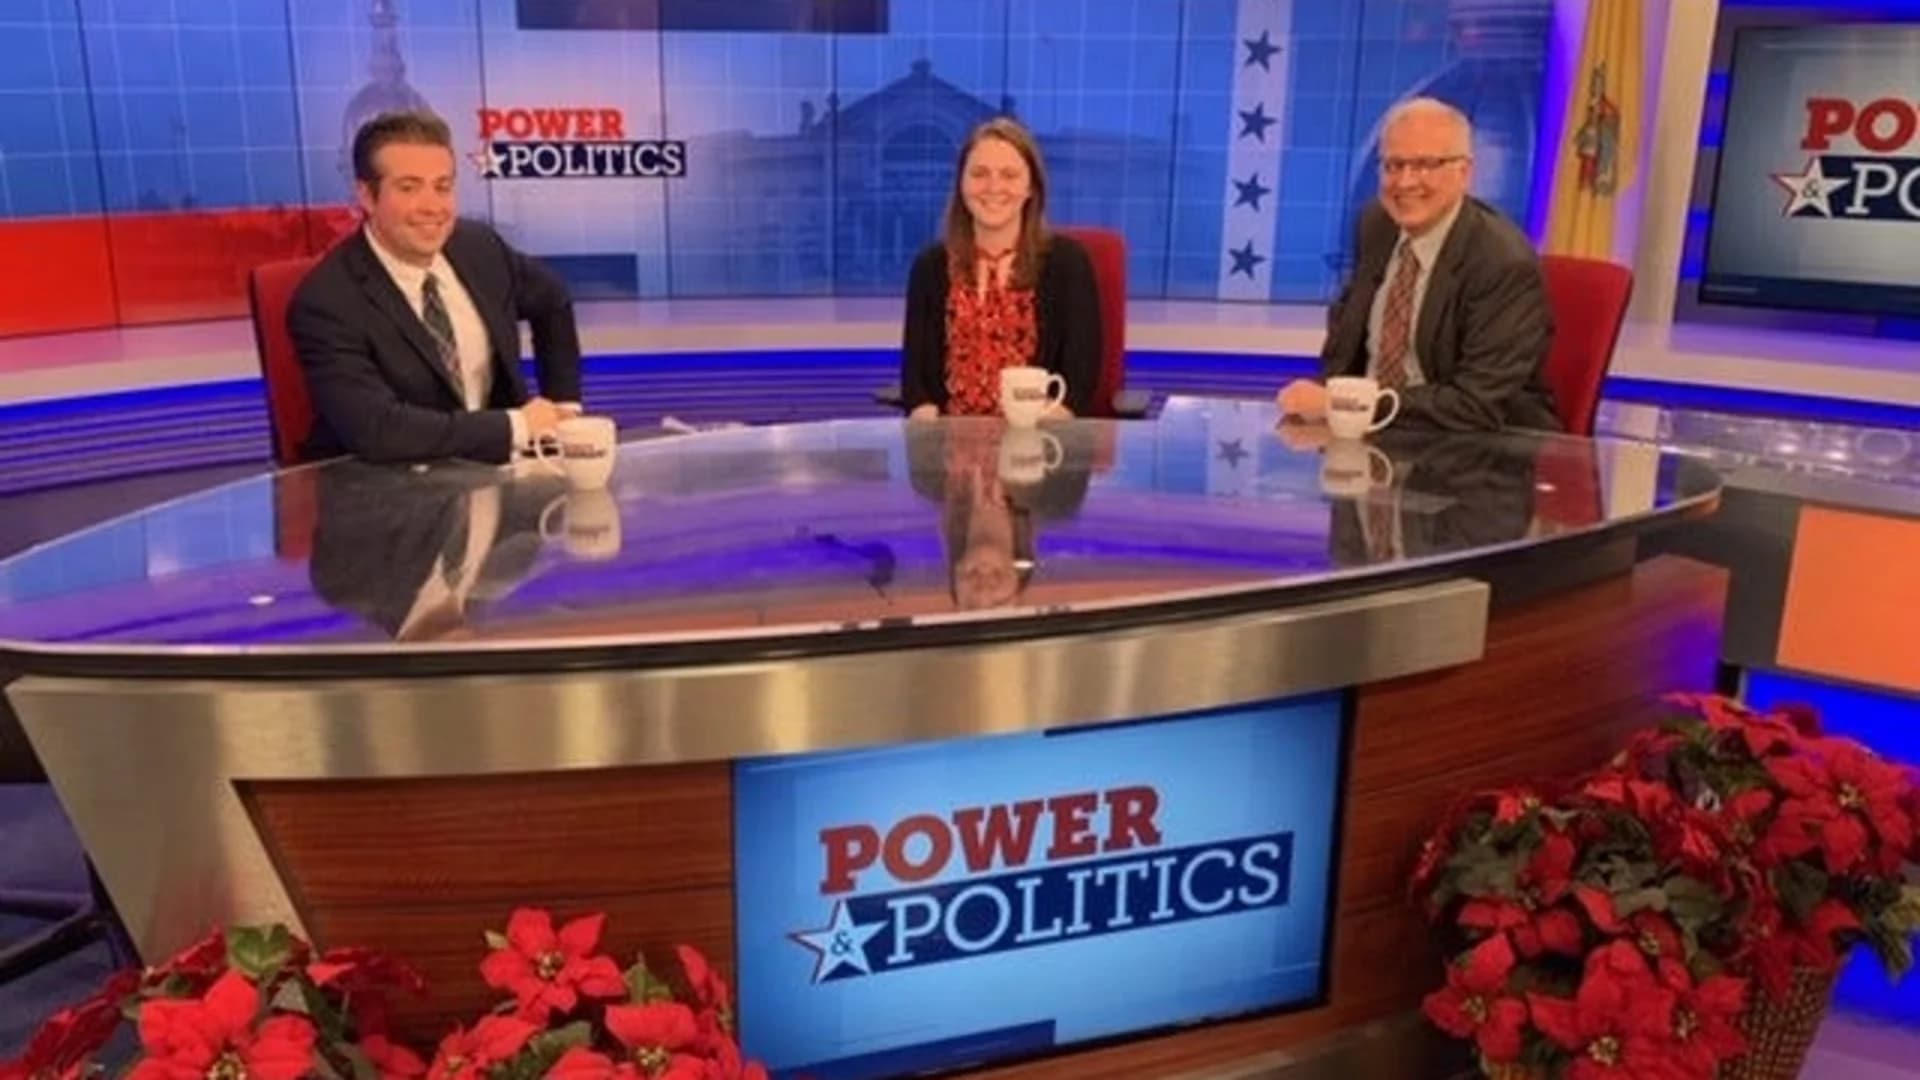 Power & Politics podcast: Rep. Van Drew's party switch, 2019 review - listen here